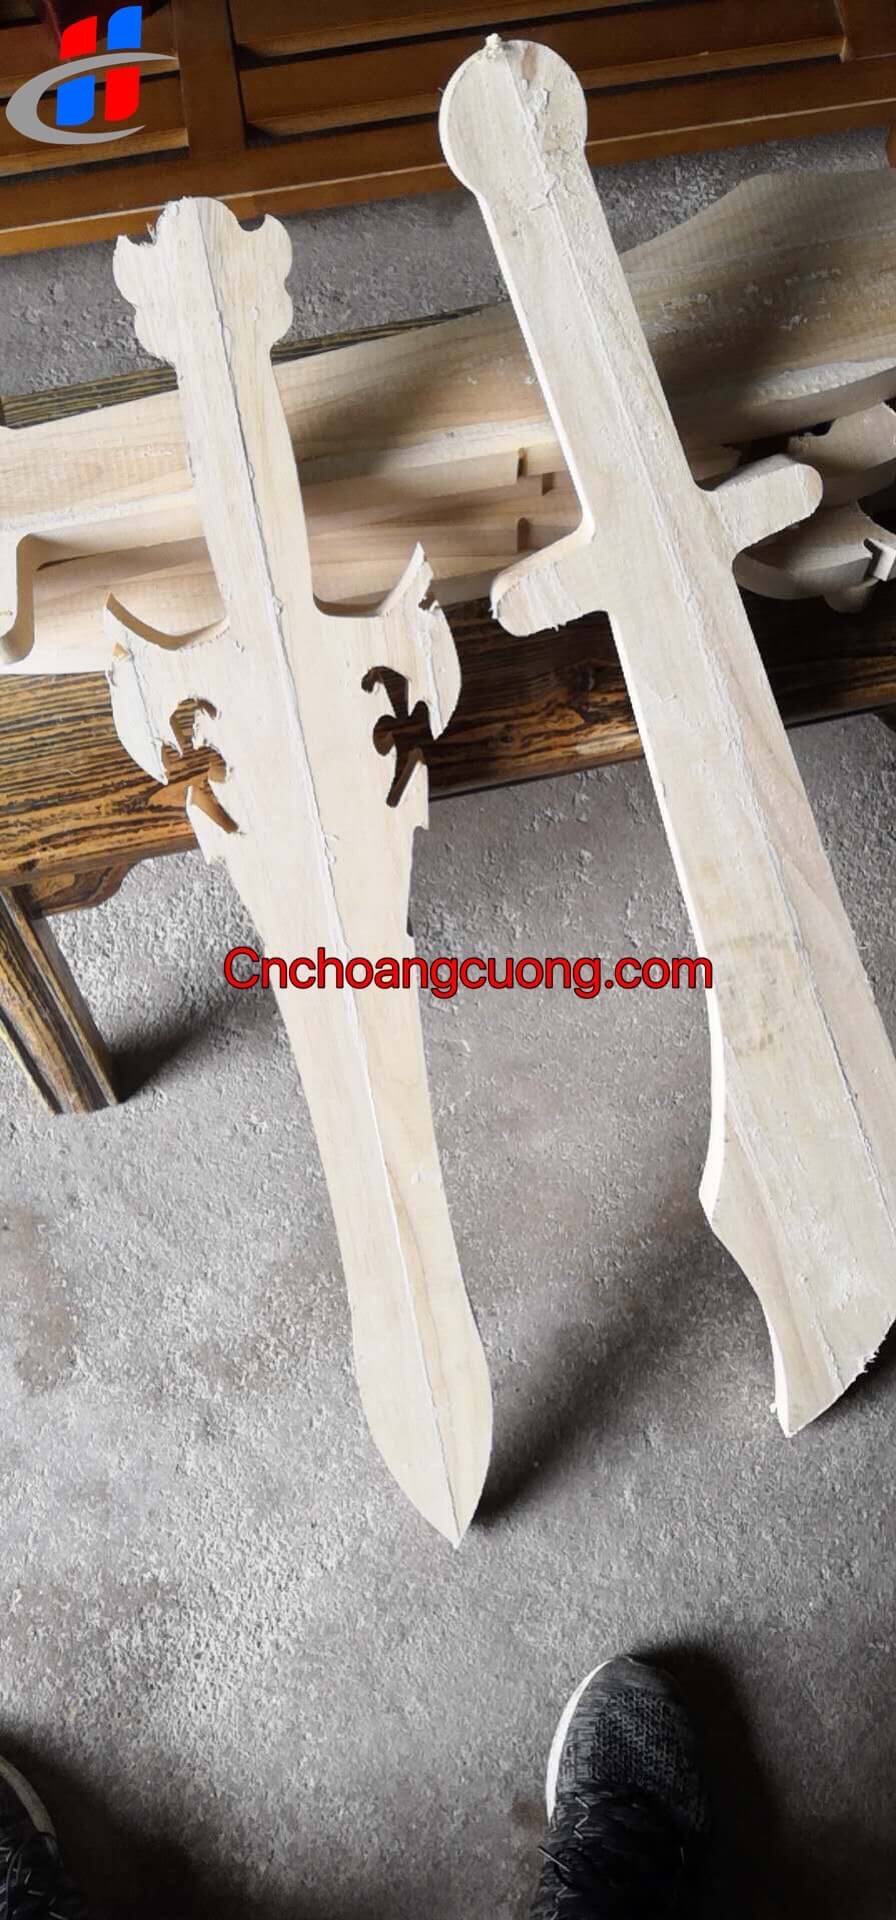 https://cnchoangcuong.com/?post_type=product&p=1511&preview=true